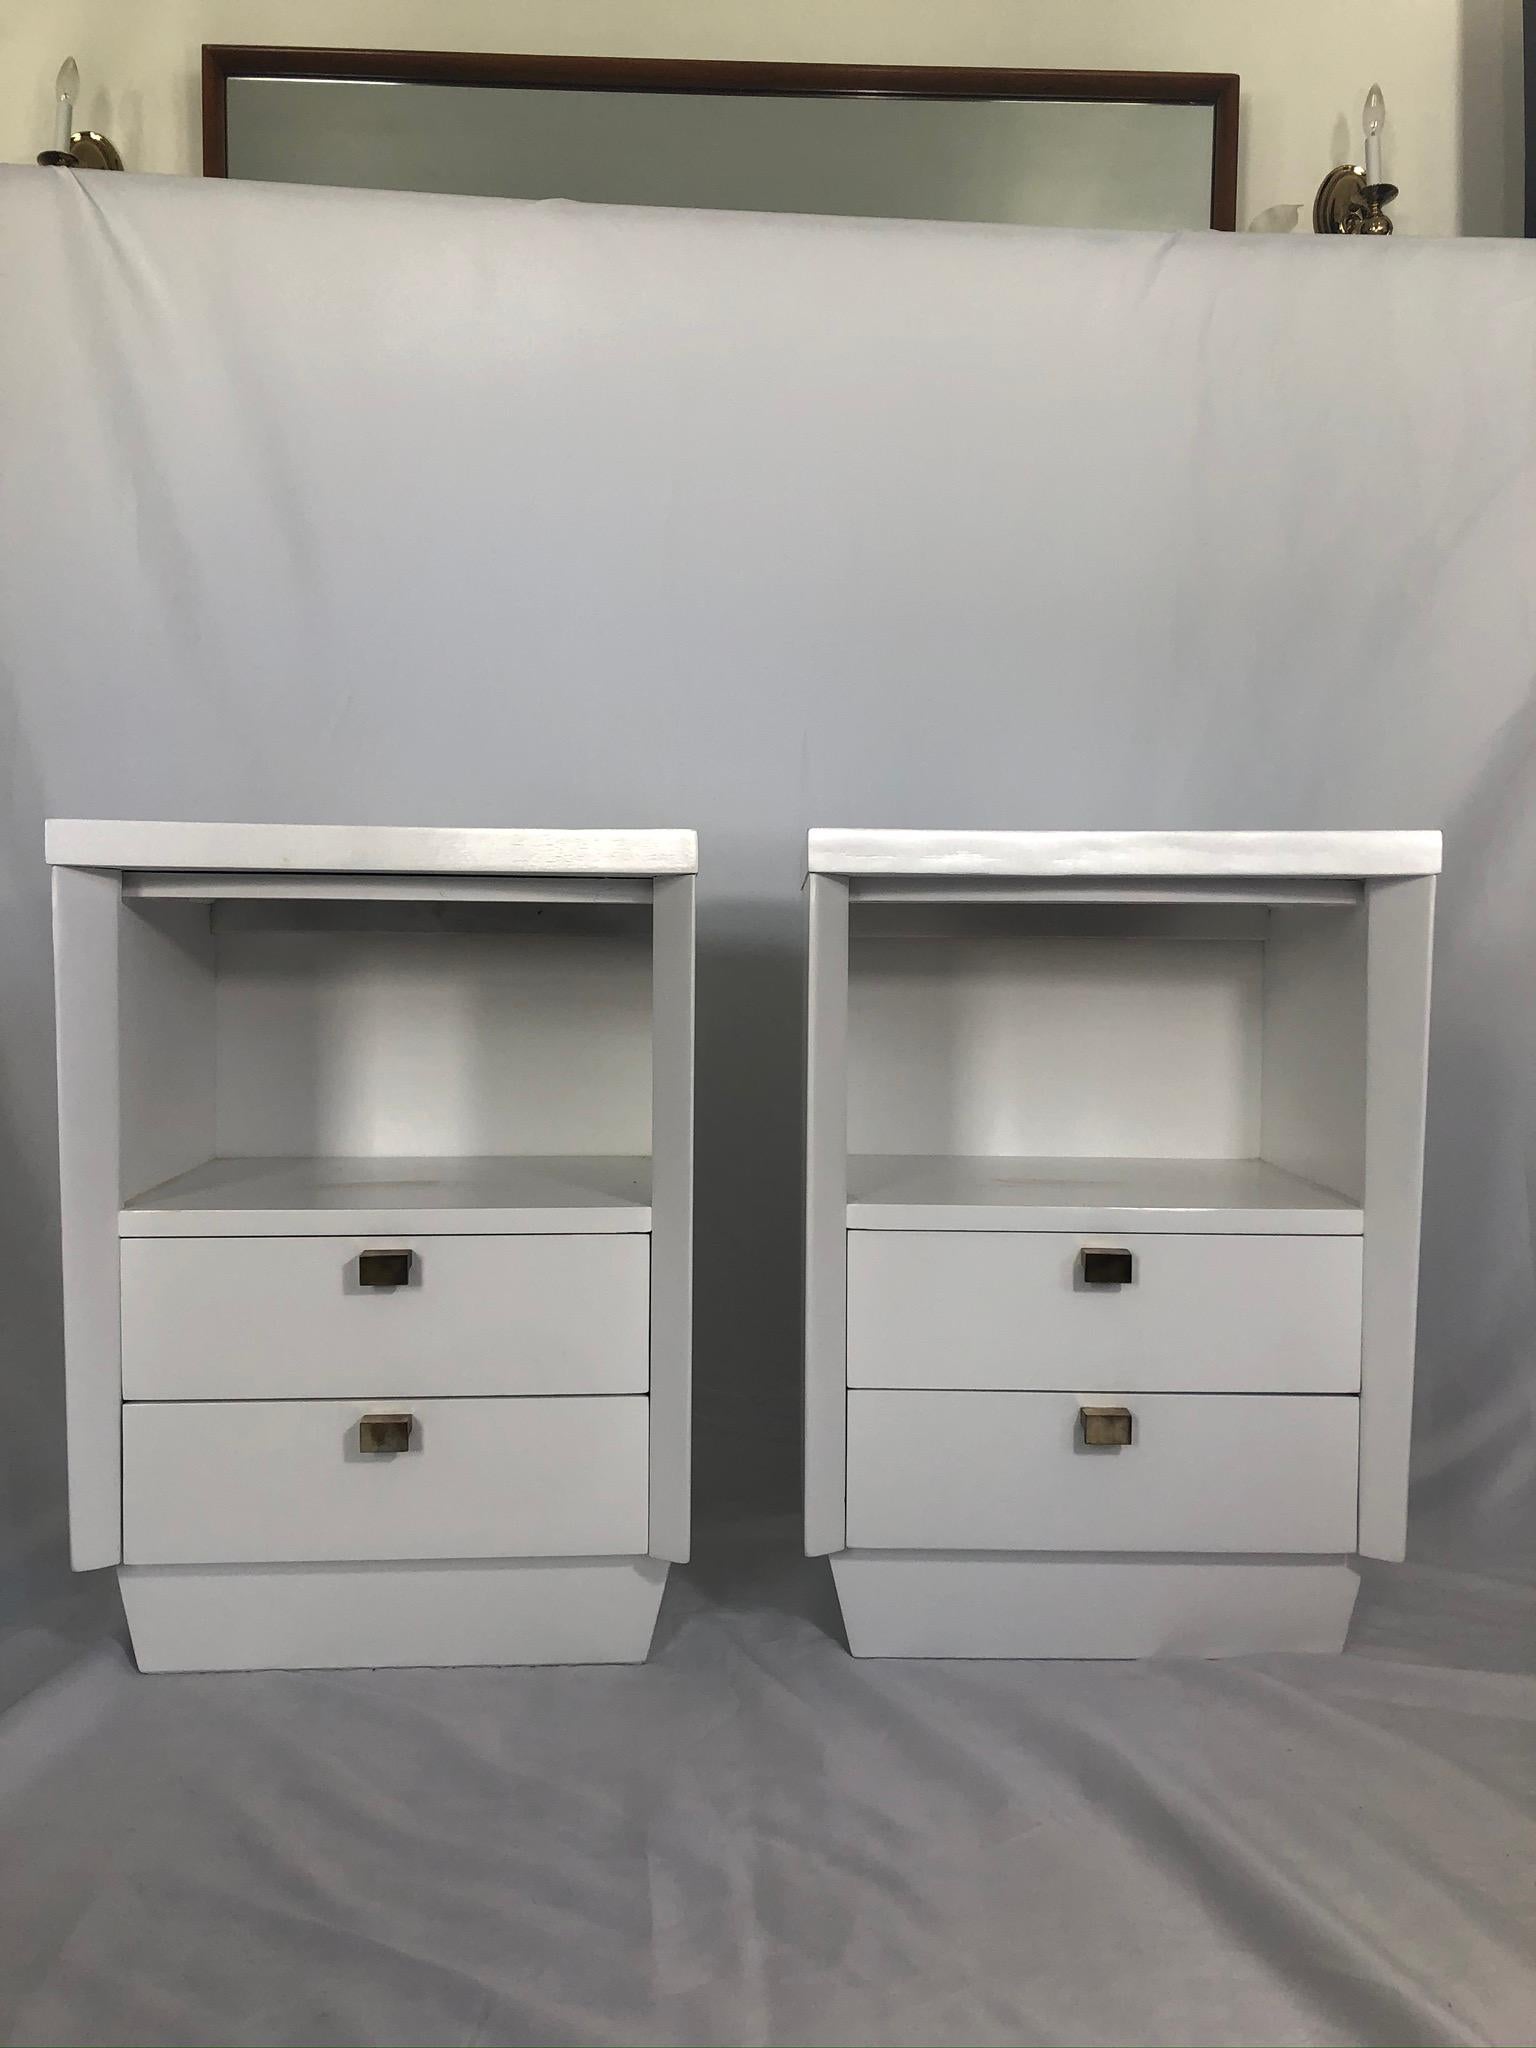 Beautiful streamline nightstands. 2 drawers and cubby for ample storage. Great forward moving lines. Brass drawer pulls. Newly lacquered finish with popping white.
Curbside to NYC/Philly $350